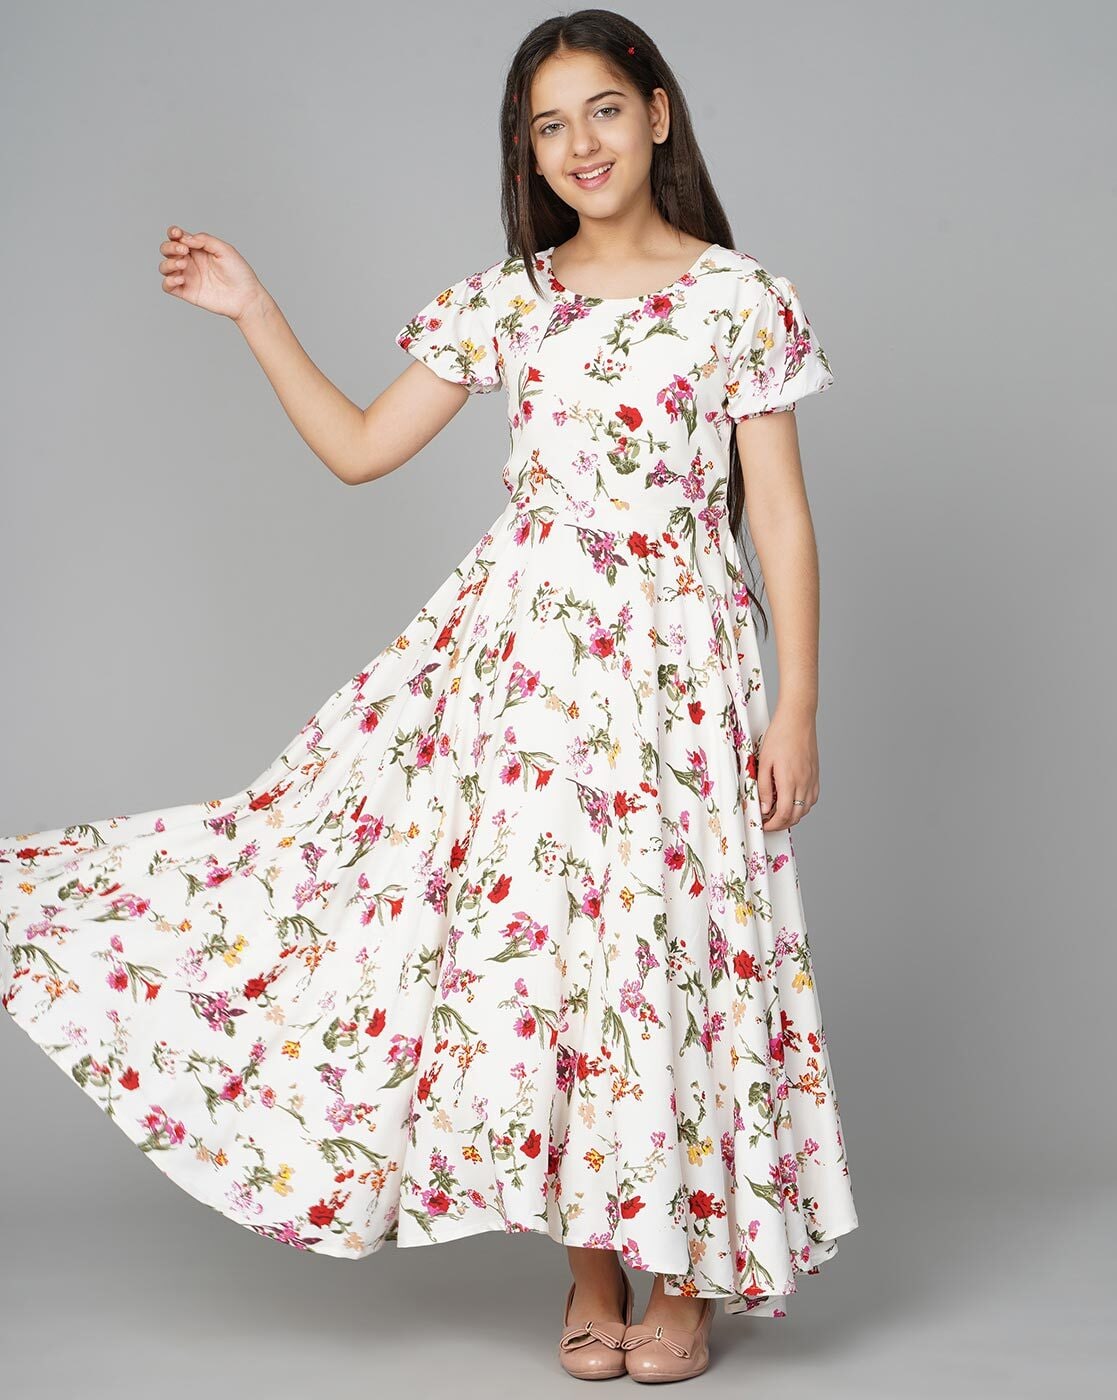 Chic floral print long frocks In A Variety Of Stylish Designs - Alibaba.com-thanhphatduhoc.com.vn